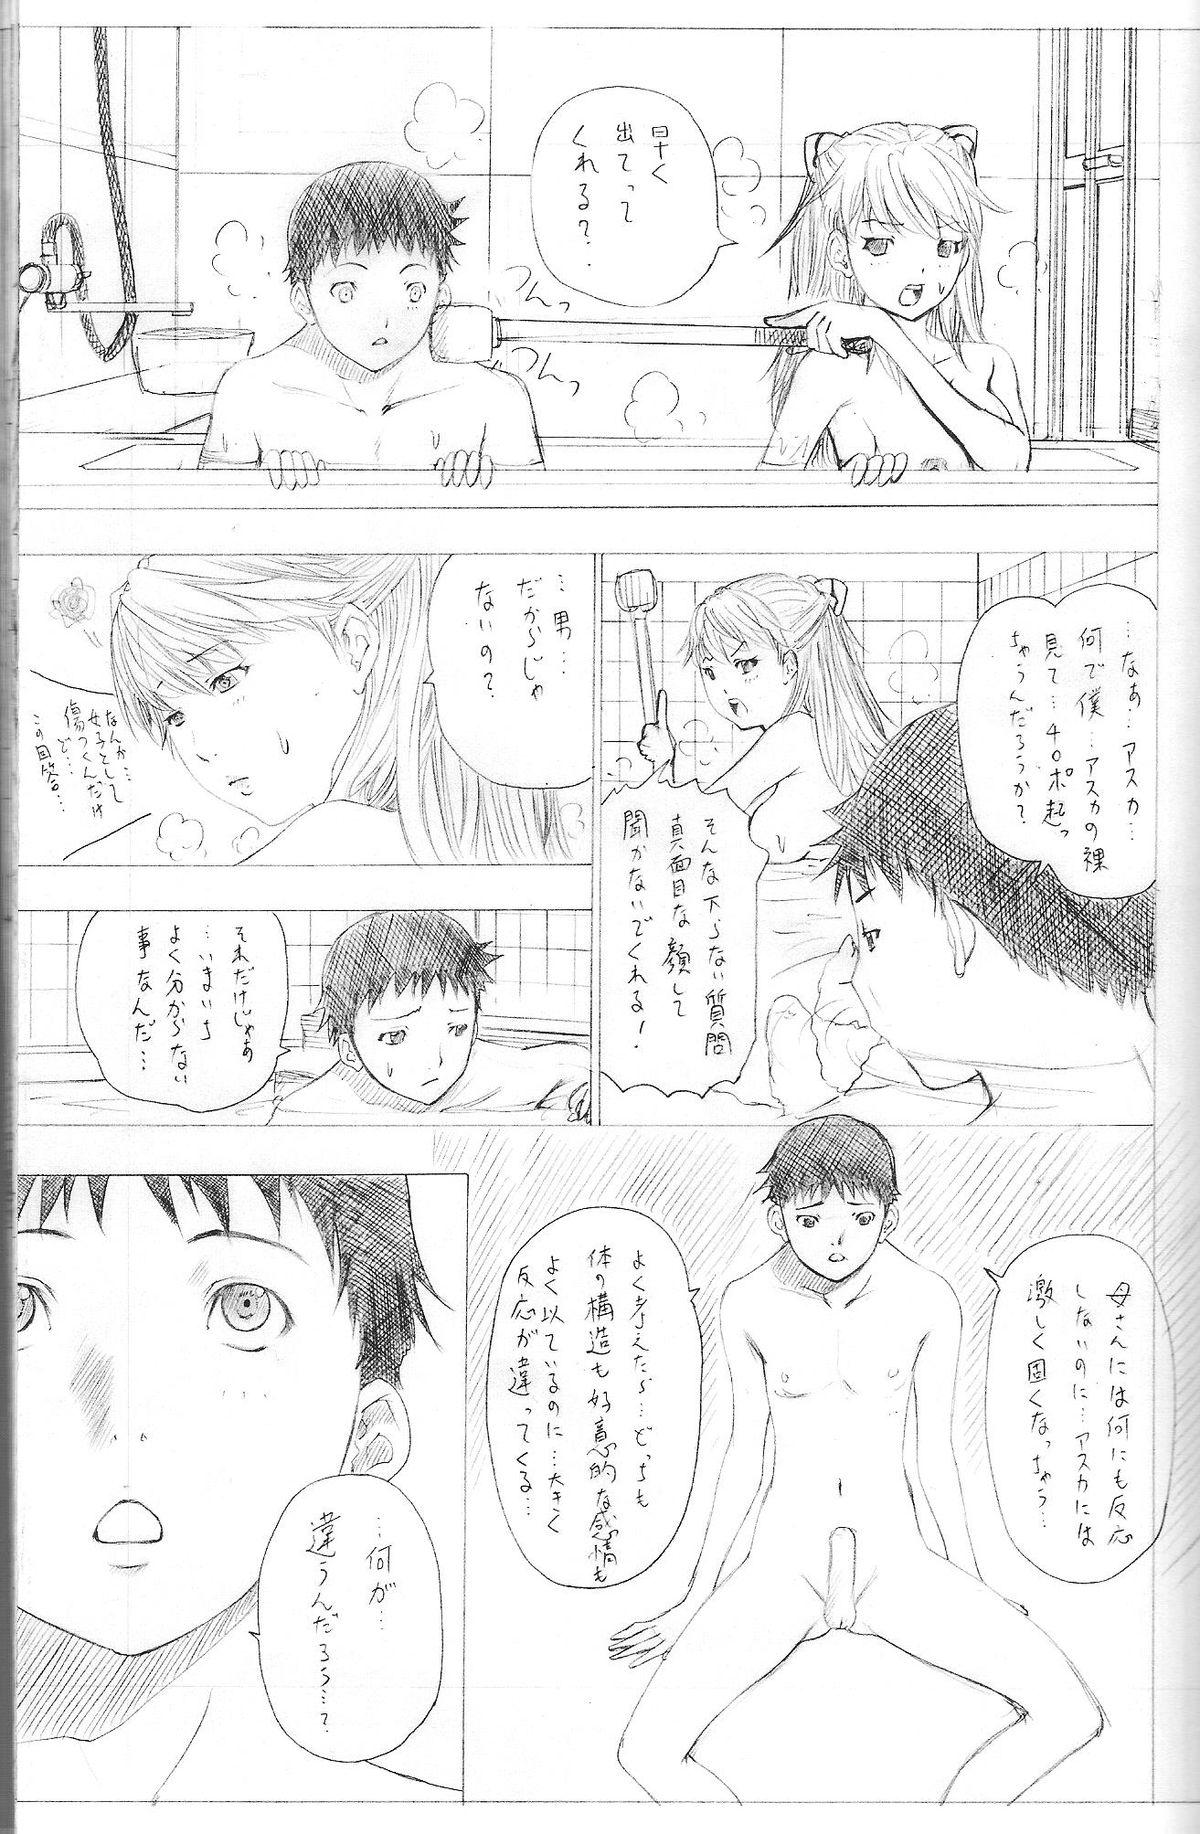 Lolicon 2010 ONLY ASKA WINTER pilot version - Neon genesis evangelion Food - Page 4